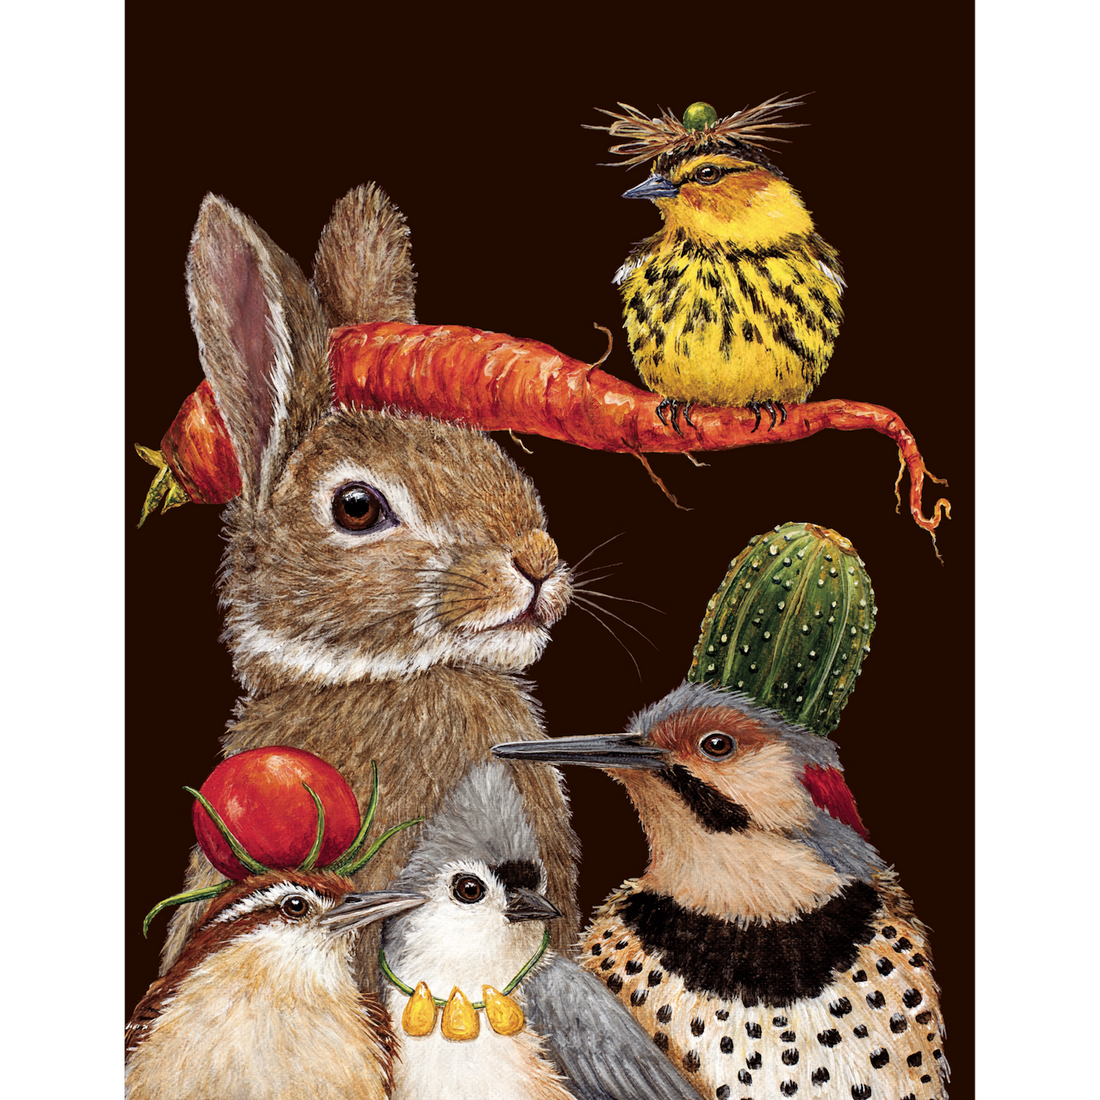 An original artwork by Vicki Sawyer featuring a wildlife group of a rabbit, cactus bird, and cactus - the Harvest Party Card by Hester &amp; Cook.